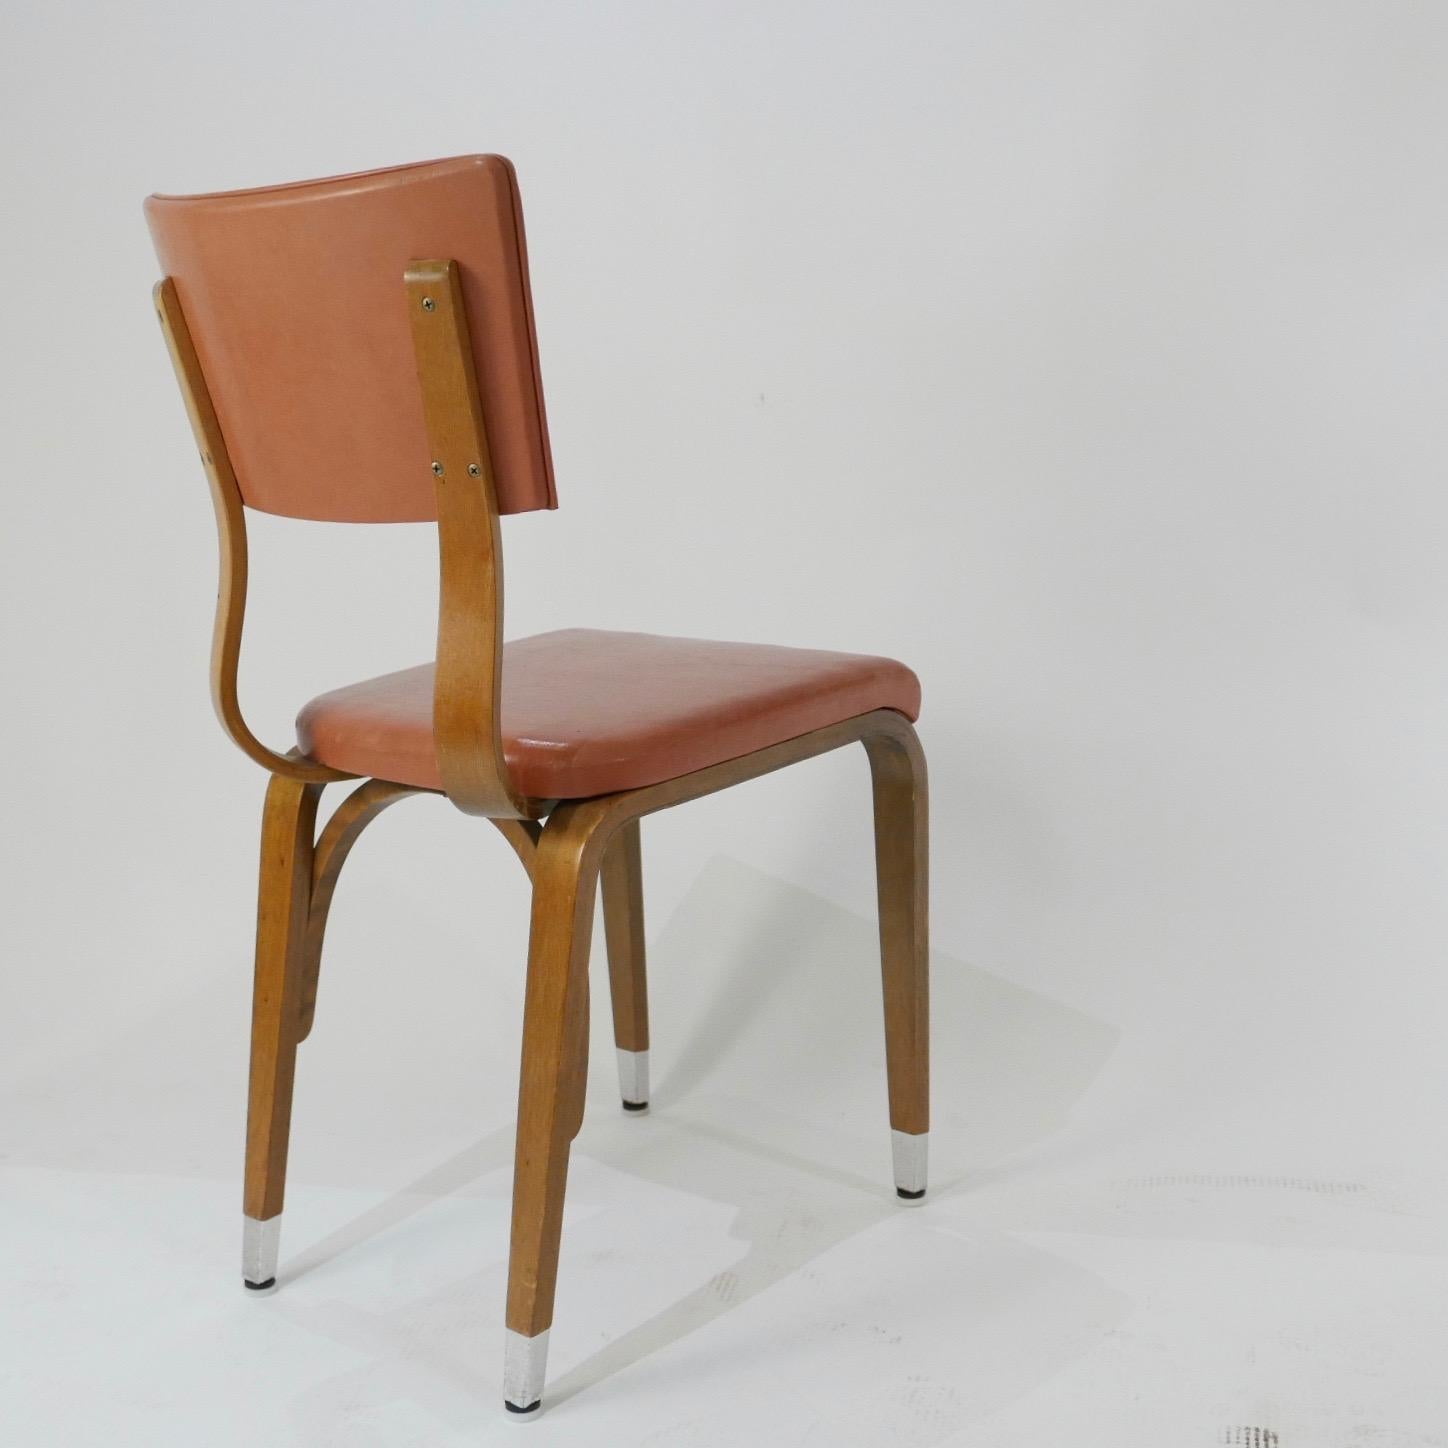 All chairs are sturdy and in good solid condition. These chairs would be great for a restaurant or cafe'. Solid bent plywood frames with a light terracotta colored seat and back. Very usable and versatile classic design that would mix well with